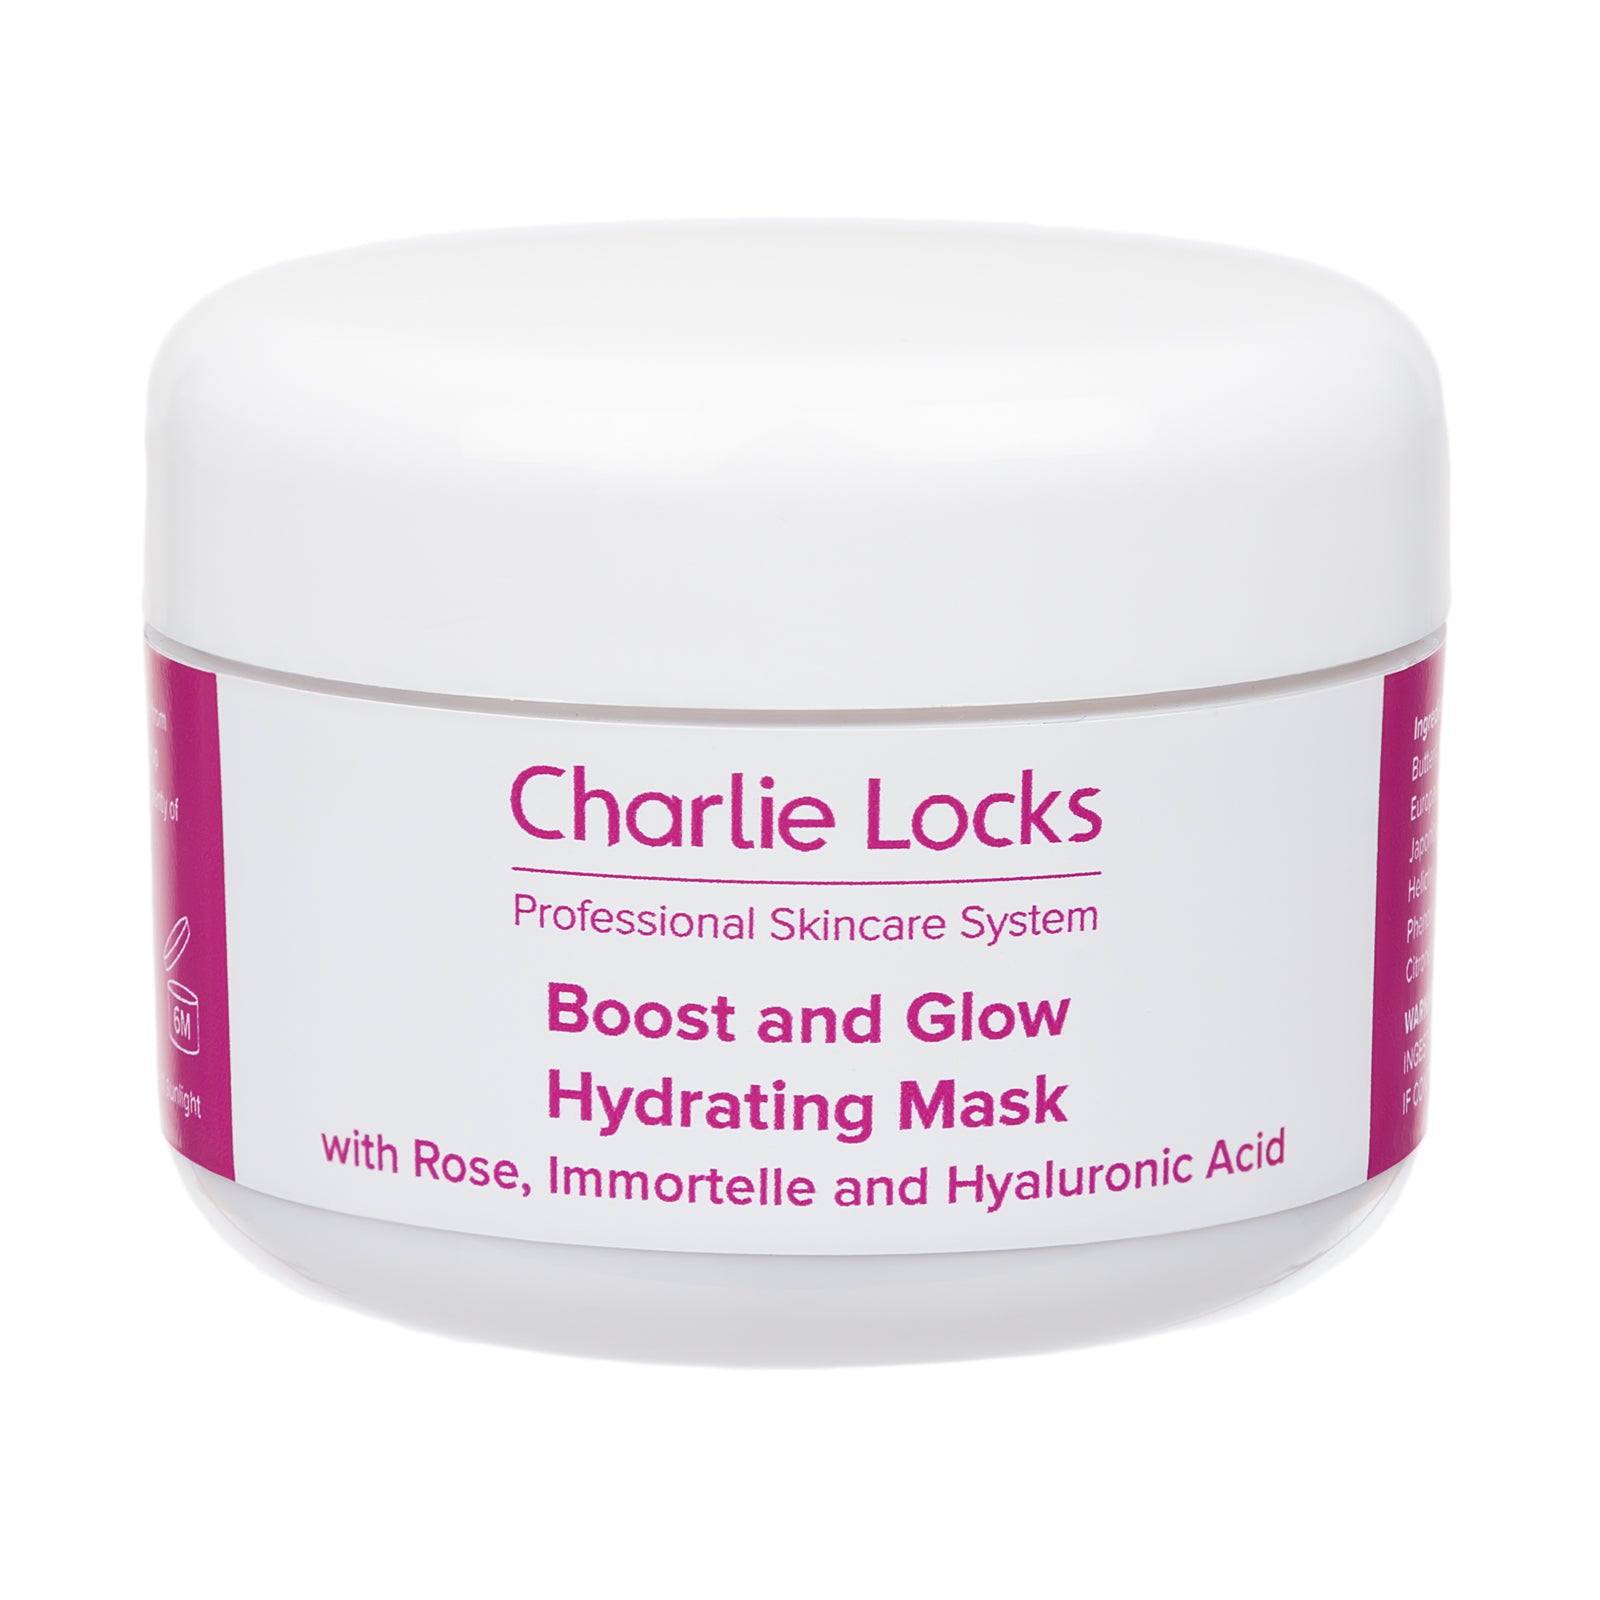 Charlie Locks Boost and Glow Hydrating Mask 100g